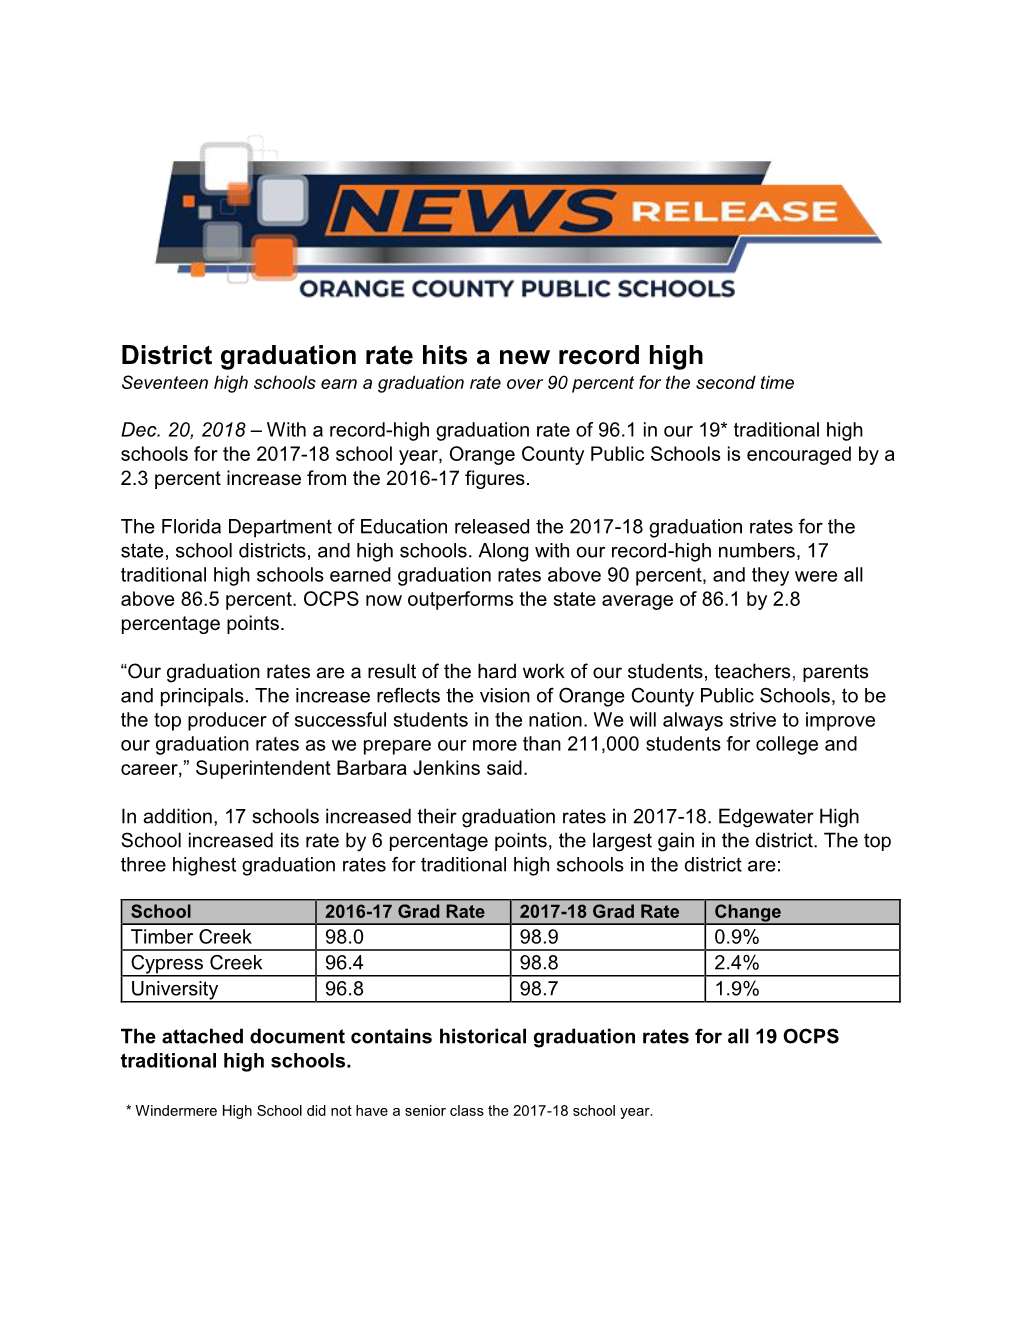 District Graduation Rate Hits a New Record High Seventeen High Schools Earn a Graduation Rate Over 90 Percent for the Second Time